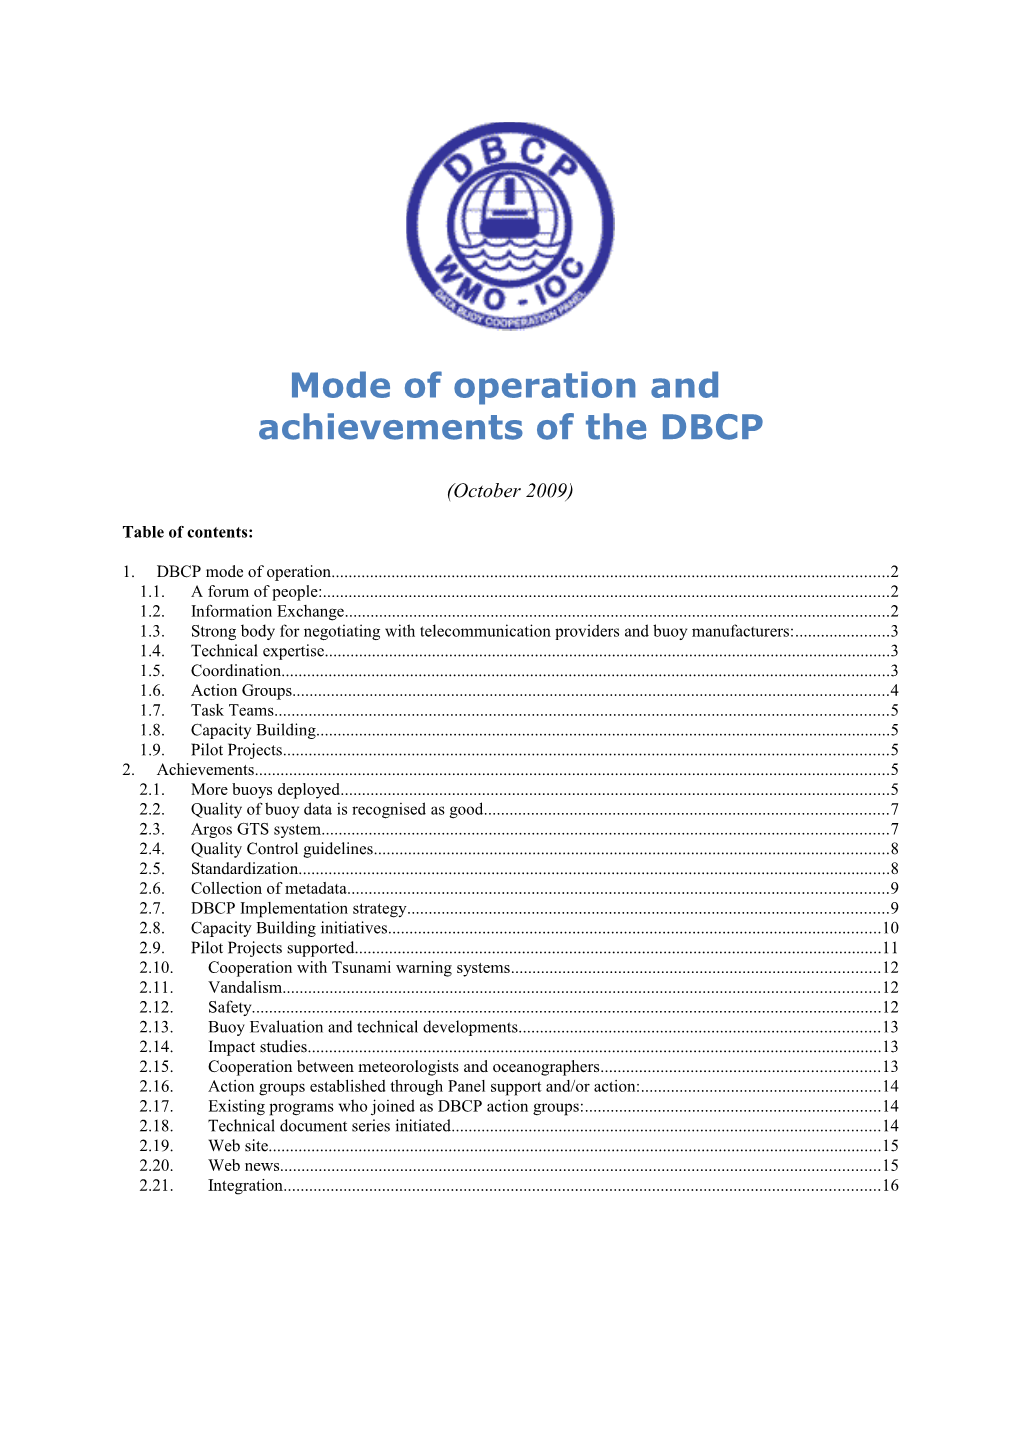 Efficiency and Achievements of the DBCP